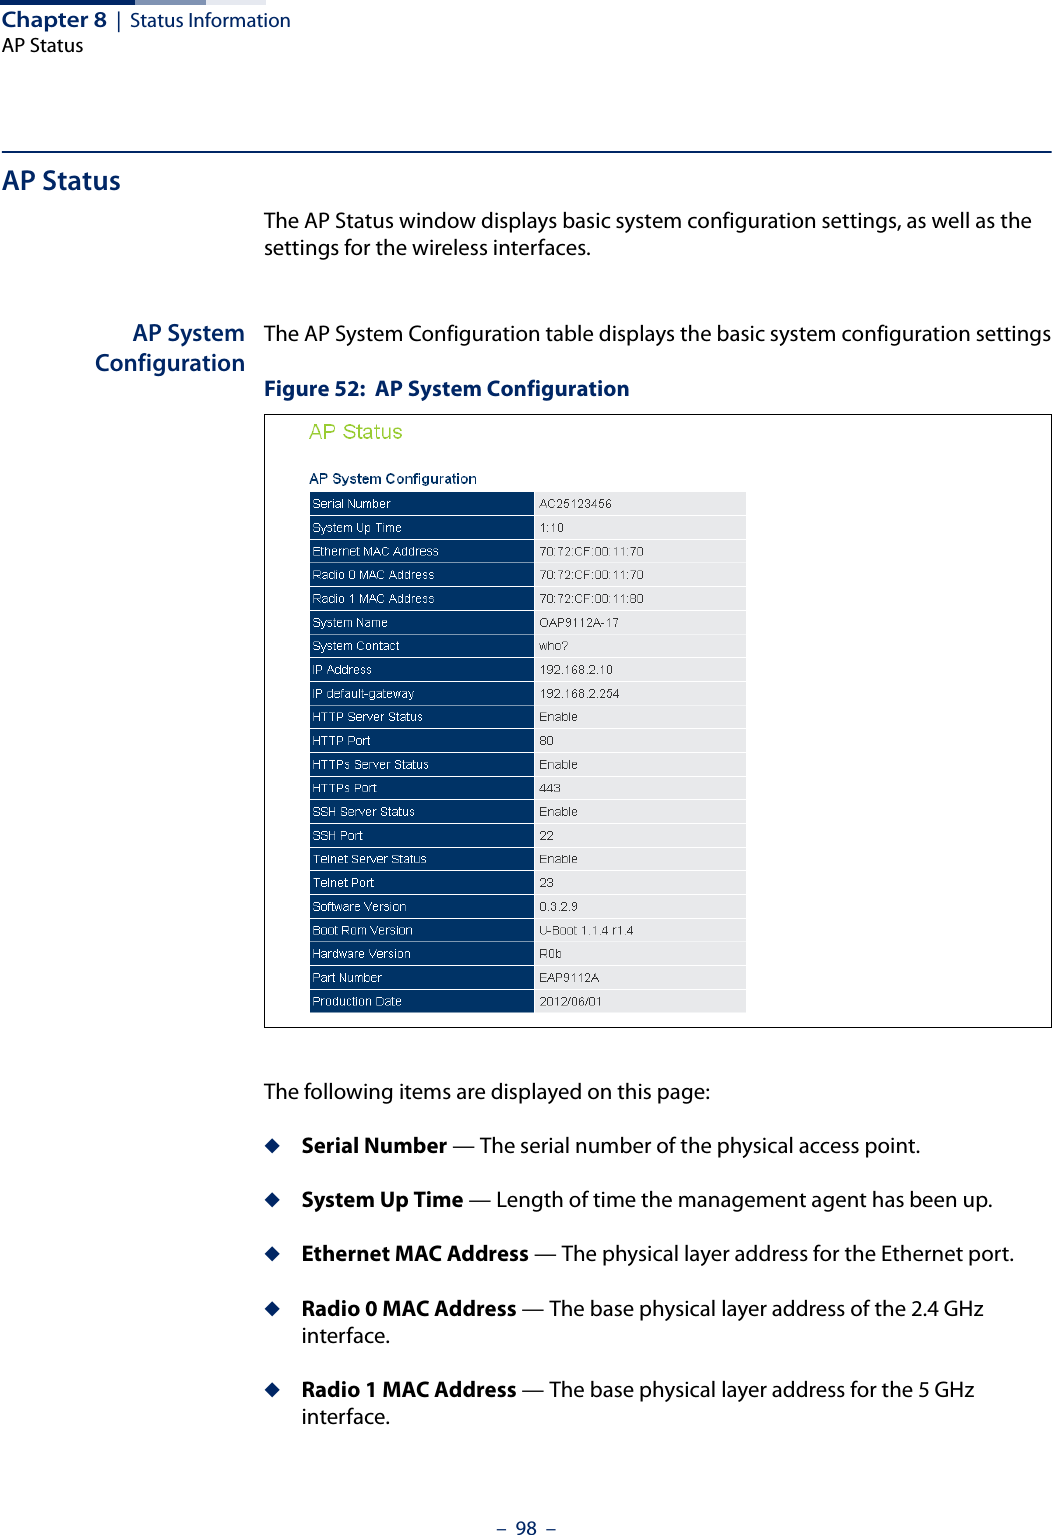 Chapter 8  |  Status InformationAP Status–  98  –AP StatusThe AP Status window displays basic system configuration settings, as well as the settings for the wireless interfaces.AP SystemConfigurationThe AP System Configuration table displays the basic system configuration settingsFigure 52:  AP System ConfigurationThe following items are displayed on this page:◆Serial Number — The serial number of the physical access point.◆System Up Time — Length of time the management agent has been up.◆Ethernet MAC Address — The physical layer address for the Ethernet port.◆Radio 0 MAC Address — The base physical layer address of the 2.4 GHz interface.◆Radio 1 MAC Address — The base physical layer address for the 5 GHz interface.